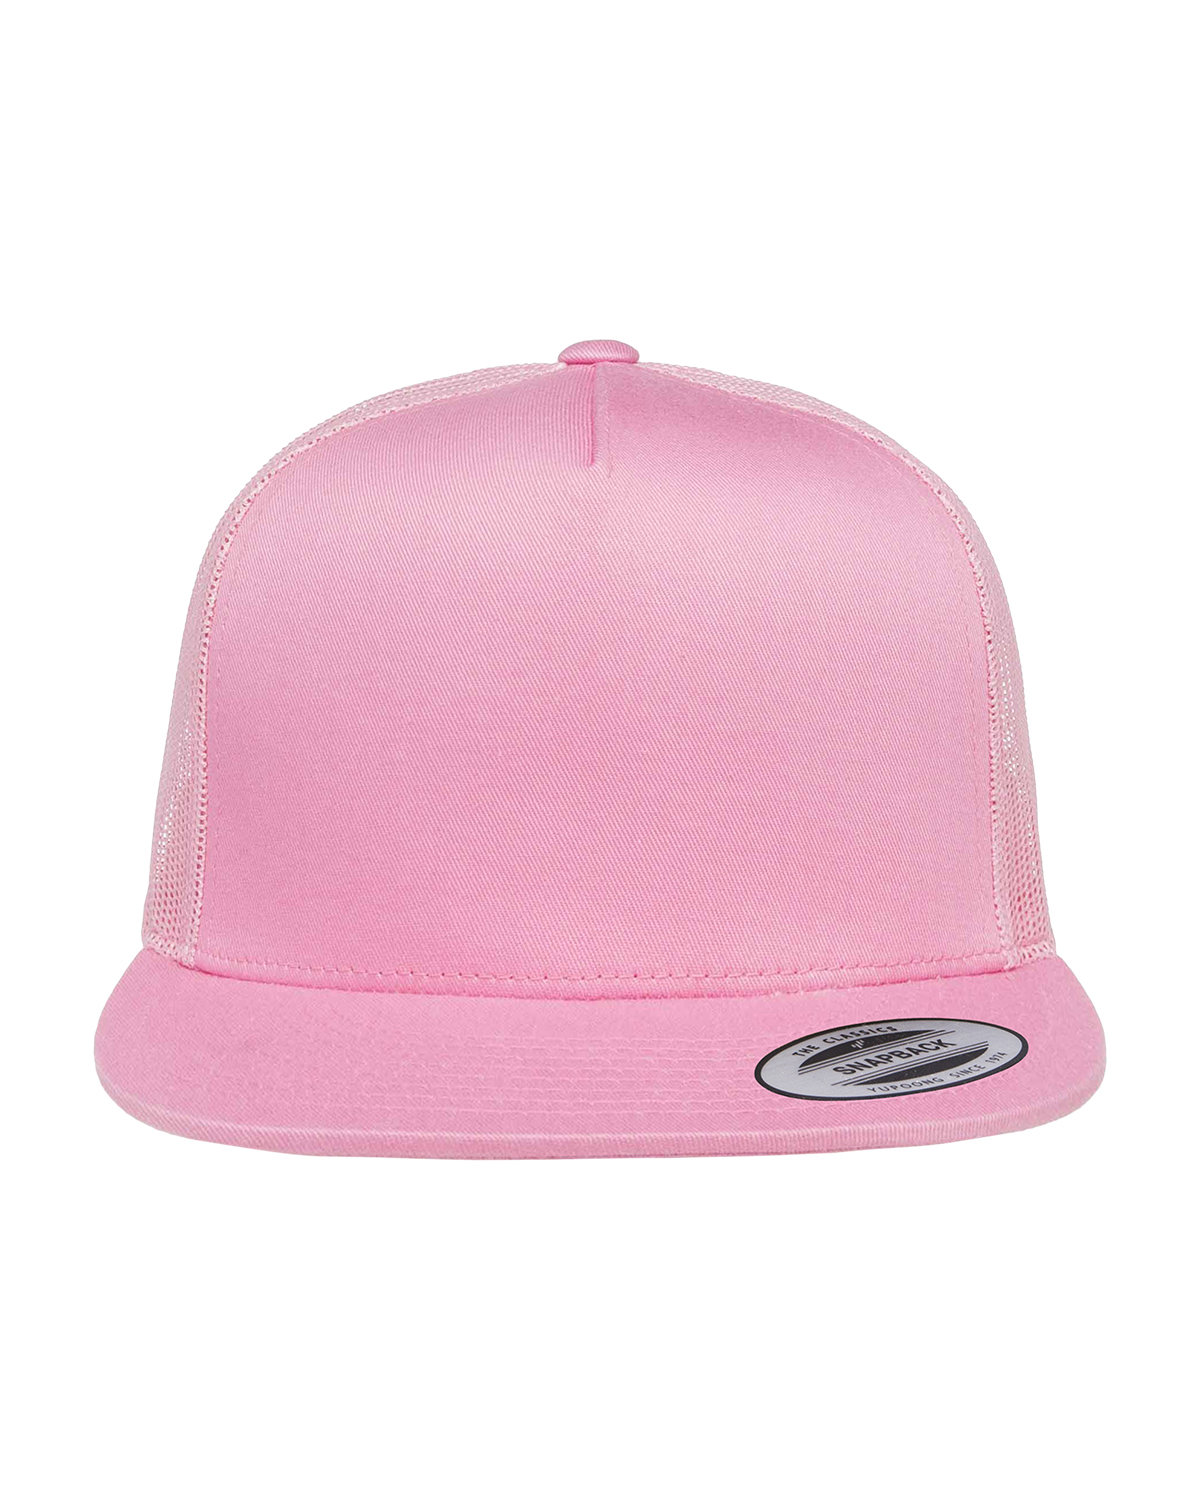 Yupoong Adult 5-Panel Classic Trucker Cap | Generic Site - Non Priced